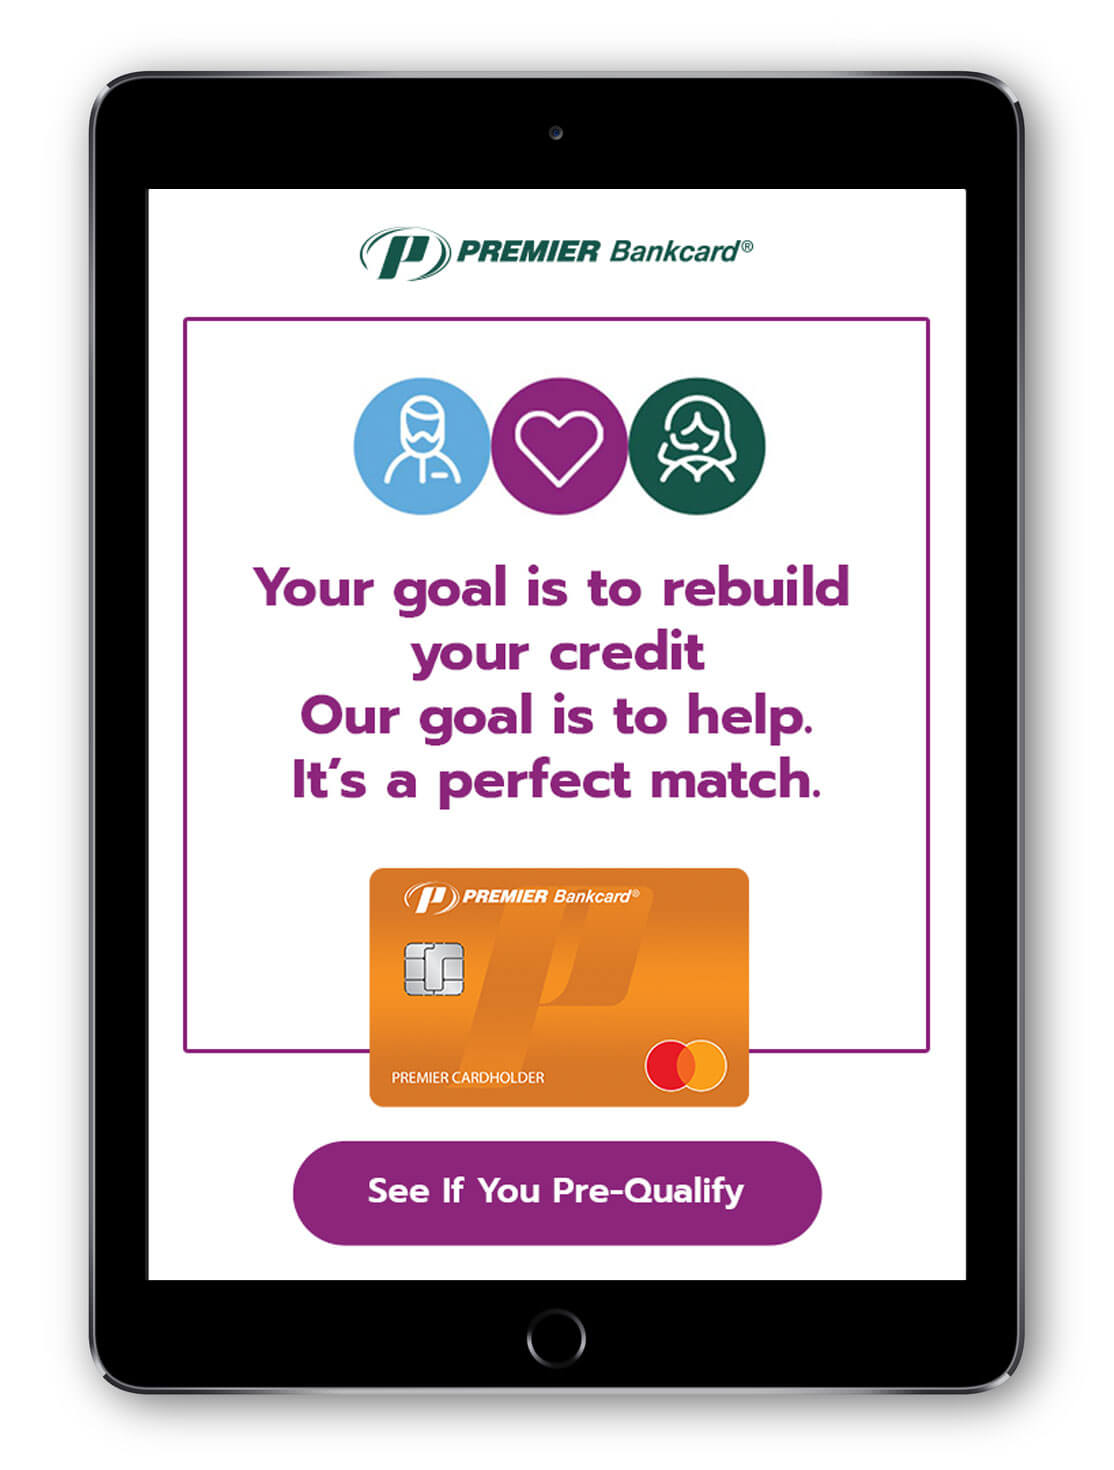 Premier Bank Card. Email. Your goal is to rebuild your credit. Our goal is to help. It's a perfect match.